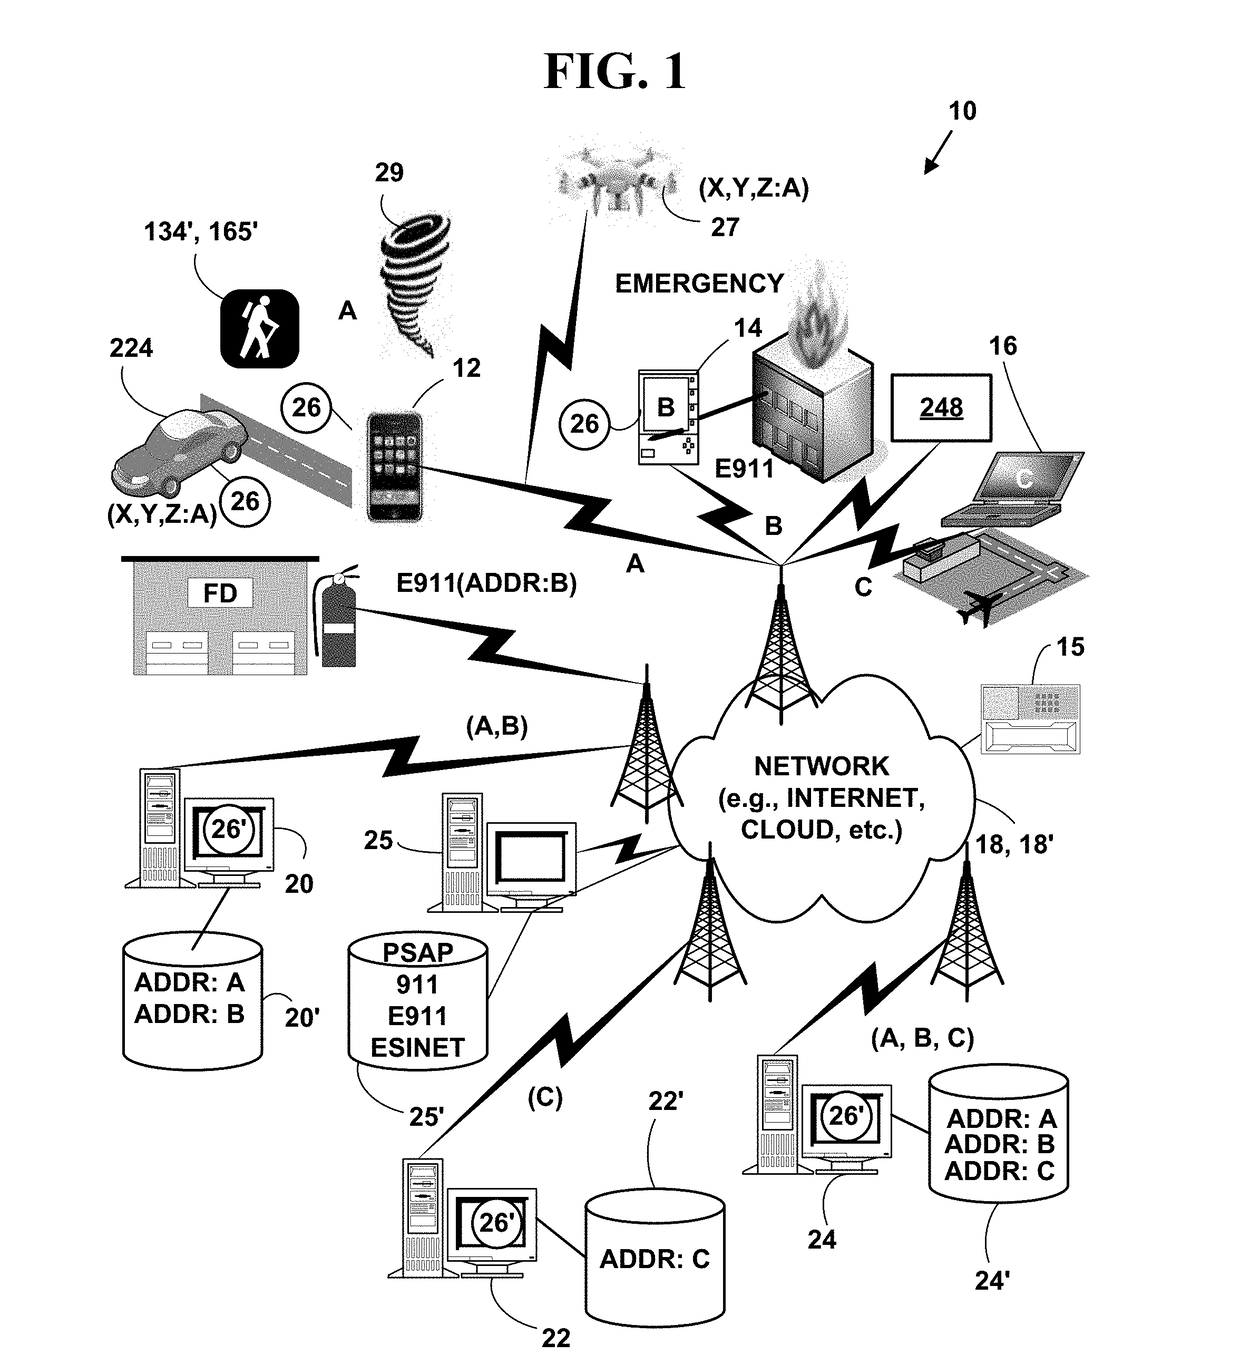 METHOD AND SYSTEM FOR AN EMERGENCY LOCATION INFORMATION SERVICE (E-LIS) FOR INTERNET OF THINGS (IoT) DEVICES